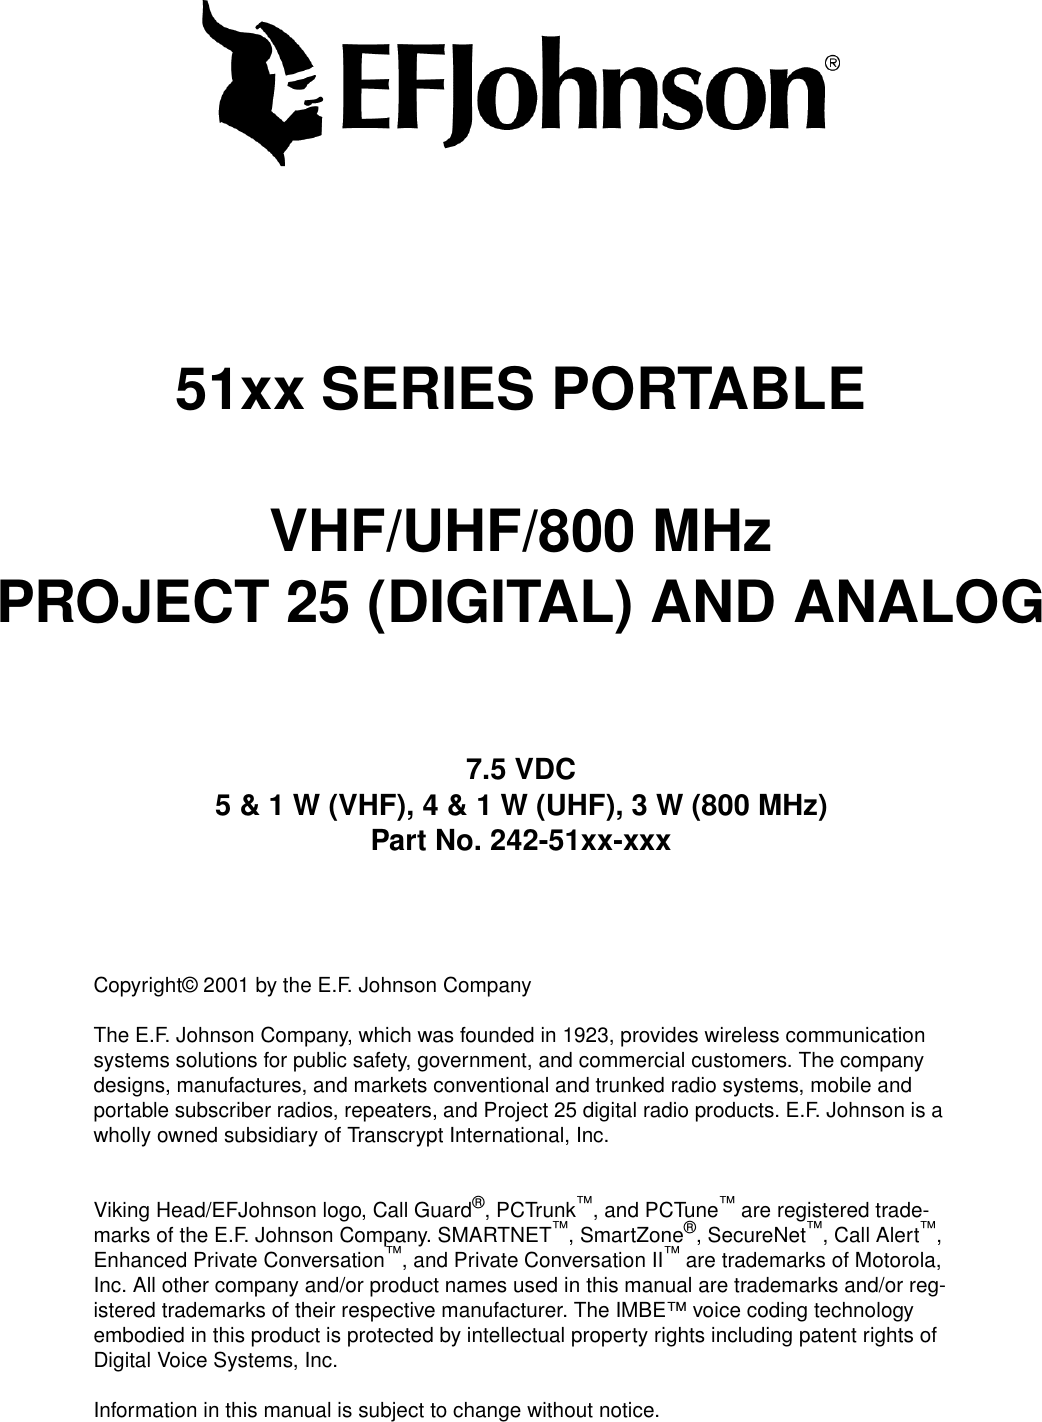 51xx SERIES PORTABLEVHF/UHF/800 MHzPROJECT 25 (DIGITAL) AND ANALOG7.5 VDC5 &amp; 1 W (VHF), 4 &amp; 1 W (UHF), 3 W (800 MHz)Part No. 242-51xx-xxxCopyright© 2001 by the E.F. Johnson CompanyThe E.F. Johnson Company, which was founded in 1923, provides wireless communication systems solutions for public safety, government, and commercial customers. The company designs, manufactures, and markets conventional and trunked radio systems, mobile and portable subscriber radios, repeaters, and Project 25 digital radio products. E.F. Johnson is a wholly owned subsidiary of Transcrypt International, Inc.Viking Head/EFJohnson logo, Call Guard®, PCTrunk™, and PCTune™ are registered trade-marks of the E.F. Johnson Company. SMARTNET™, SmartZone®, SecureNet™, Call Alert™, Enhanced Private Conversation™, and Private Conversation II™ are trademarks of Motorola, Inc. All other company and/or product names used in this manual are trademarks and/or reg-istered trademarks of their respective manufacturer. The IMBE™ voice coding technology embodied in this product is protected by intellectual property rights including patent rights of Digital Voice Systems, Inc.Information in this manual is subject to change without notice. 